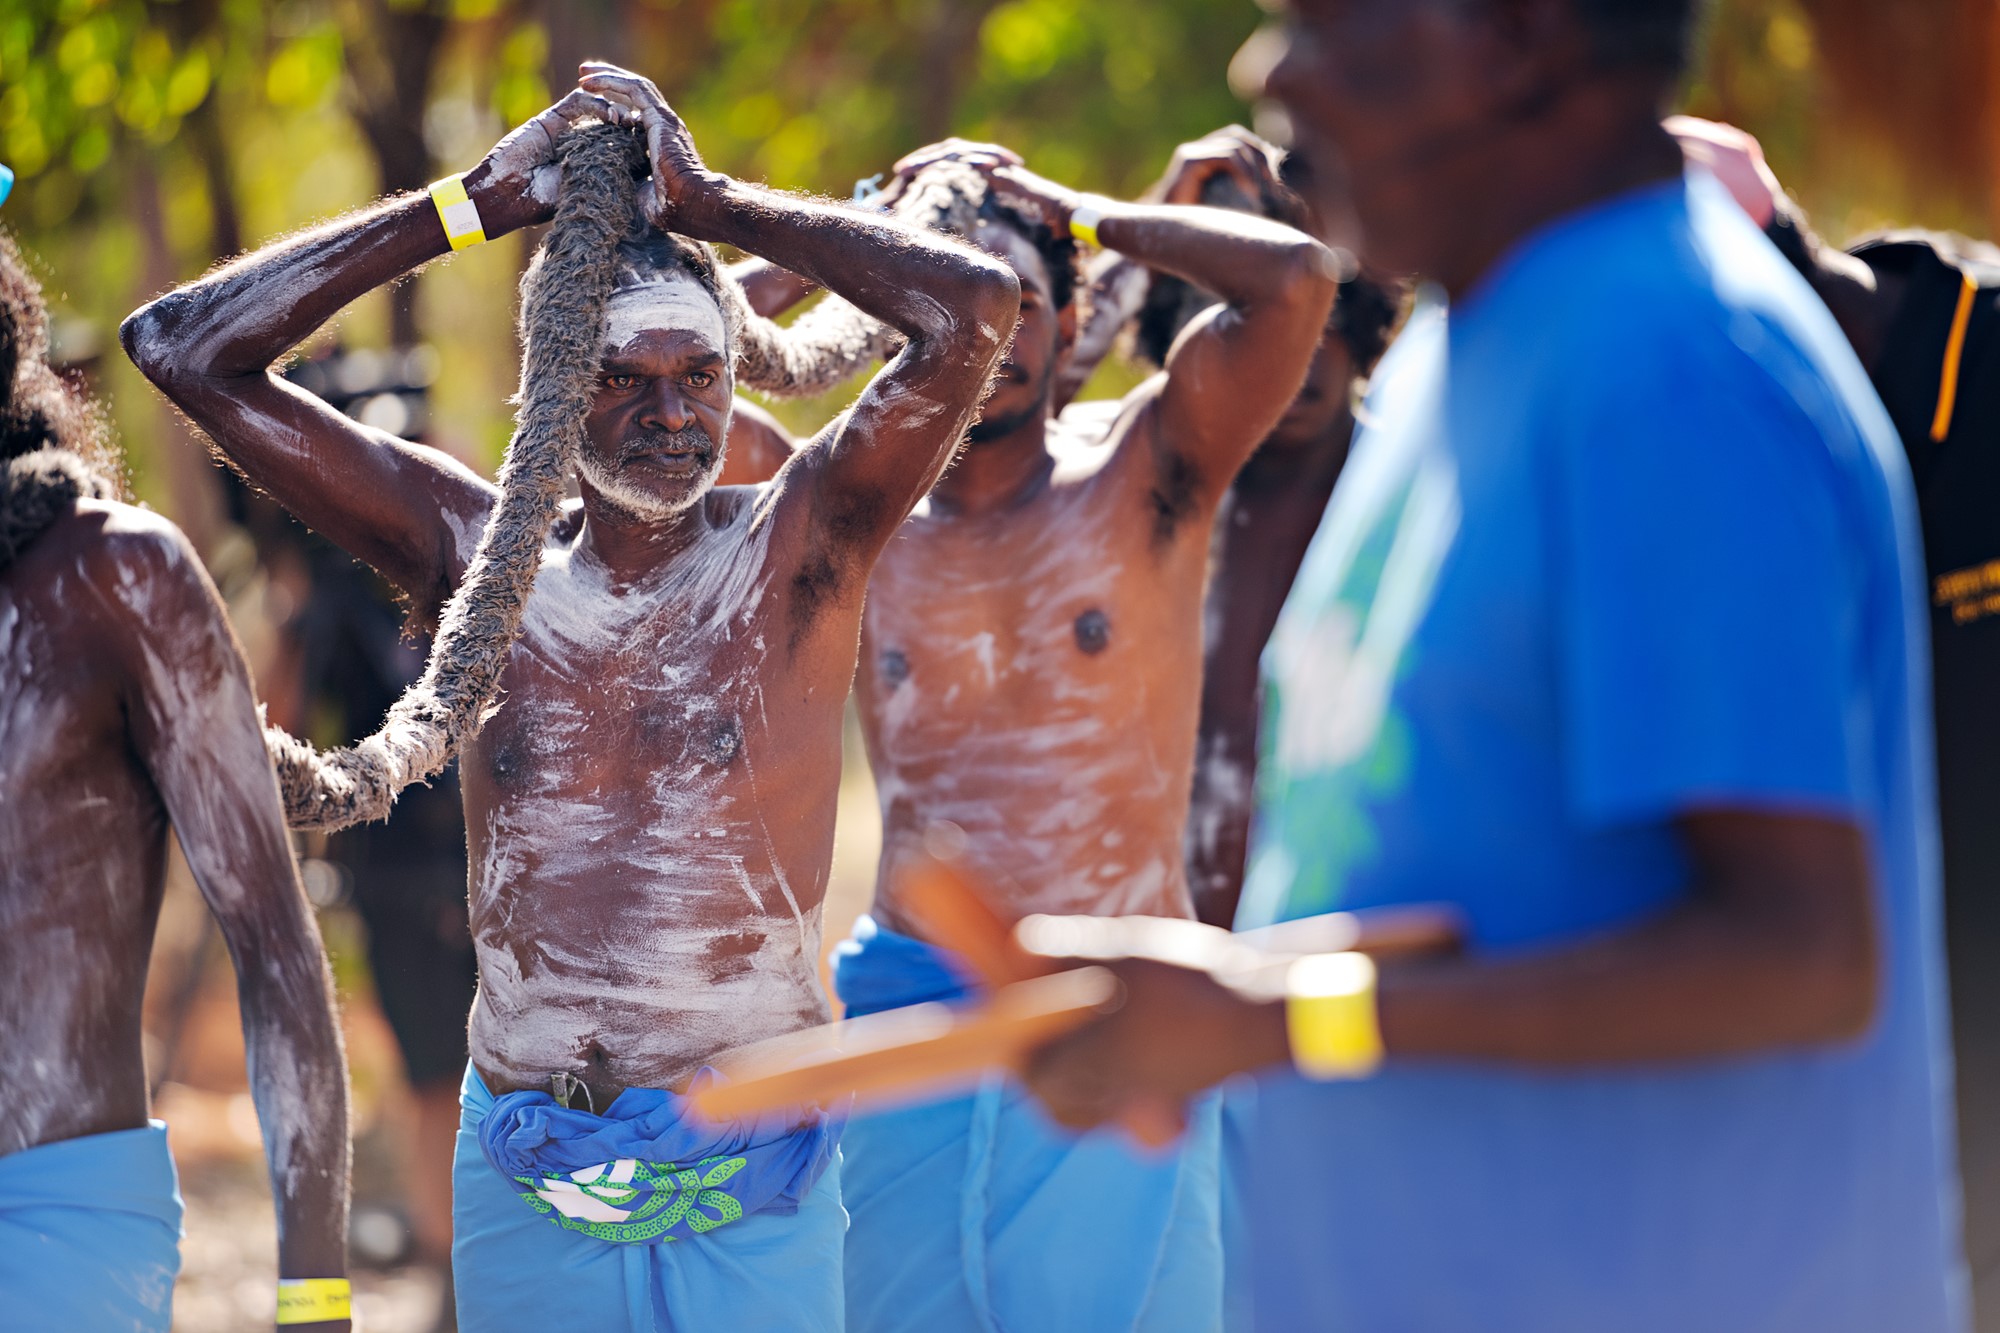 A group of Indigenous men hold a rope as they prepare to perform a dance